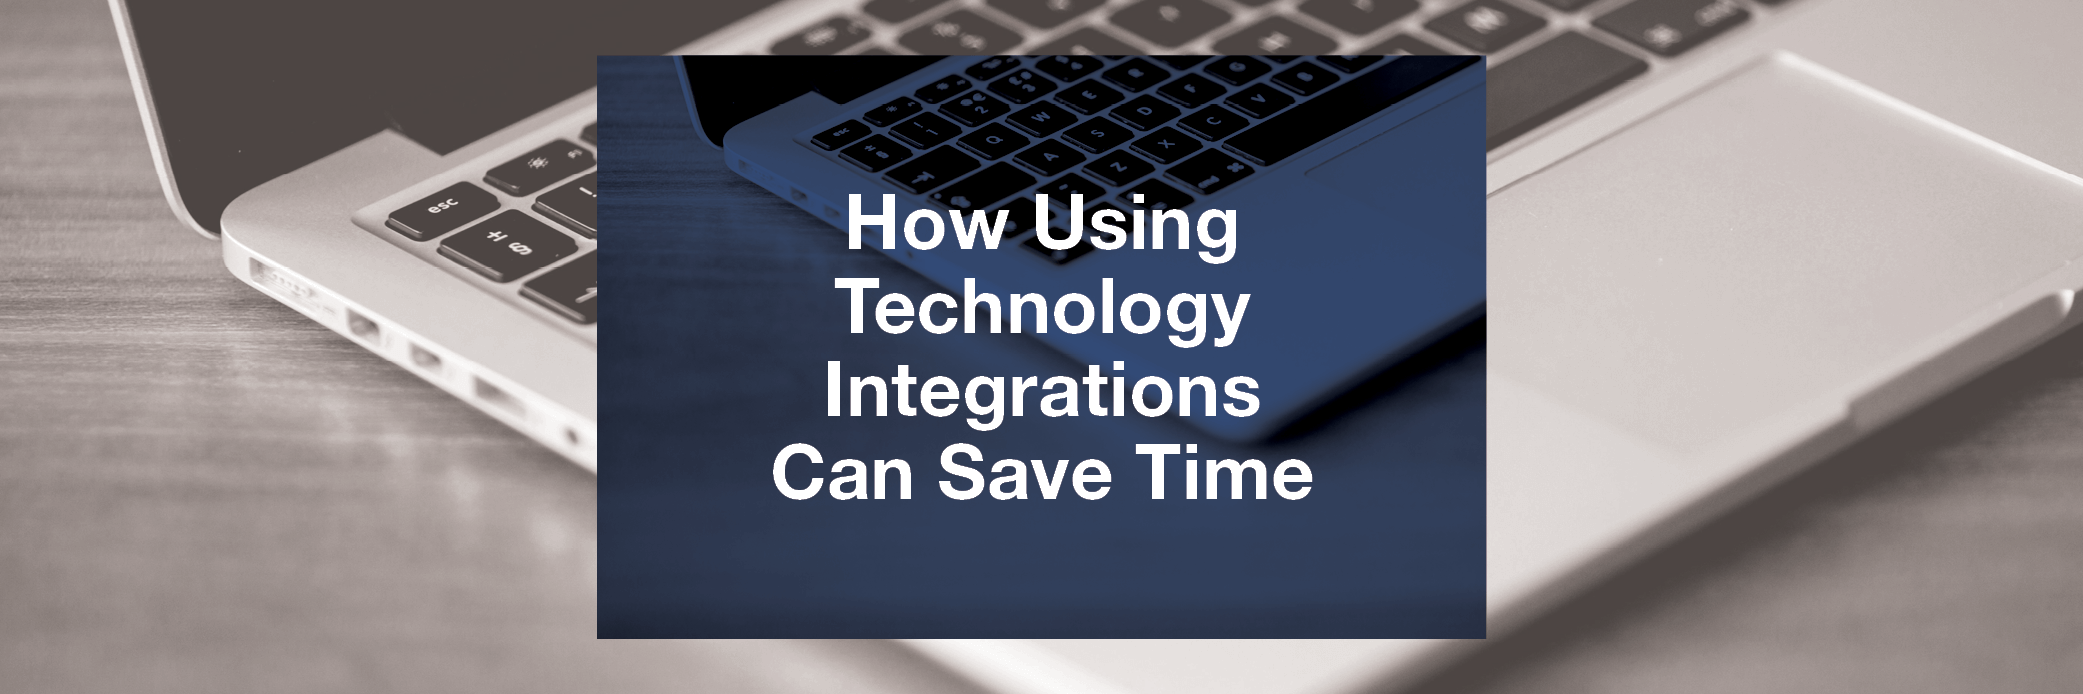 How Using Technology Integrations Can Save Time